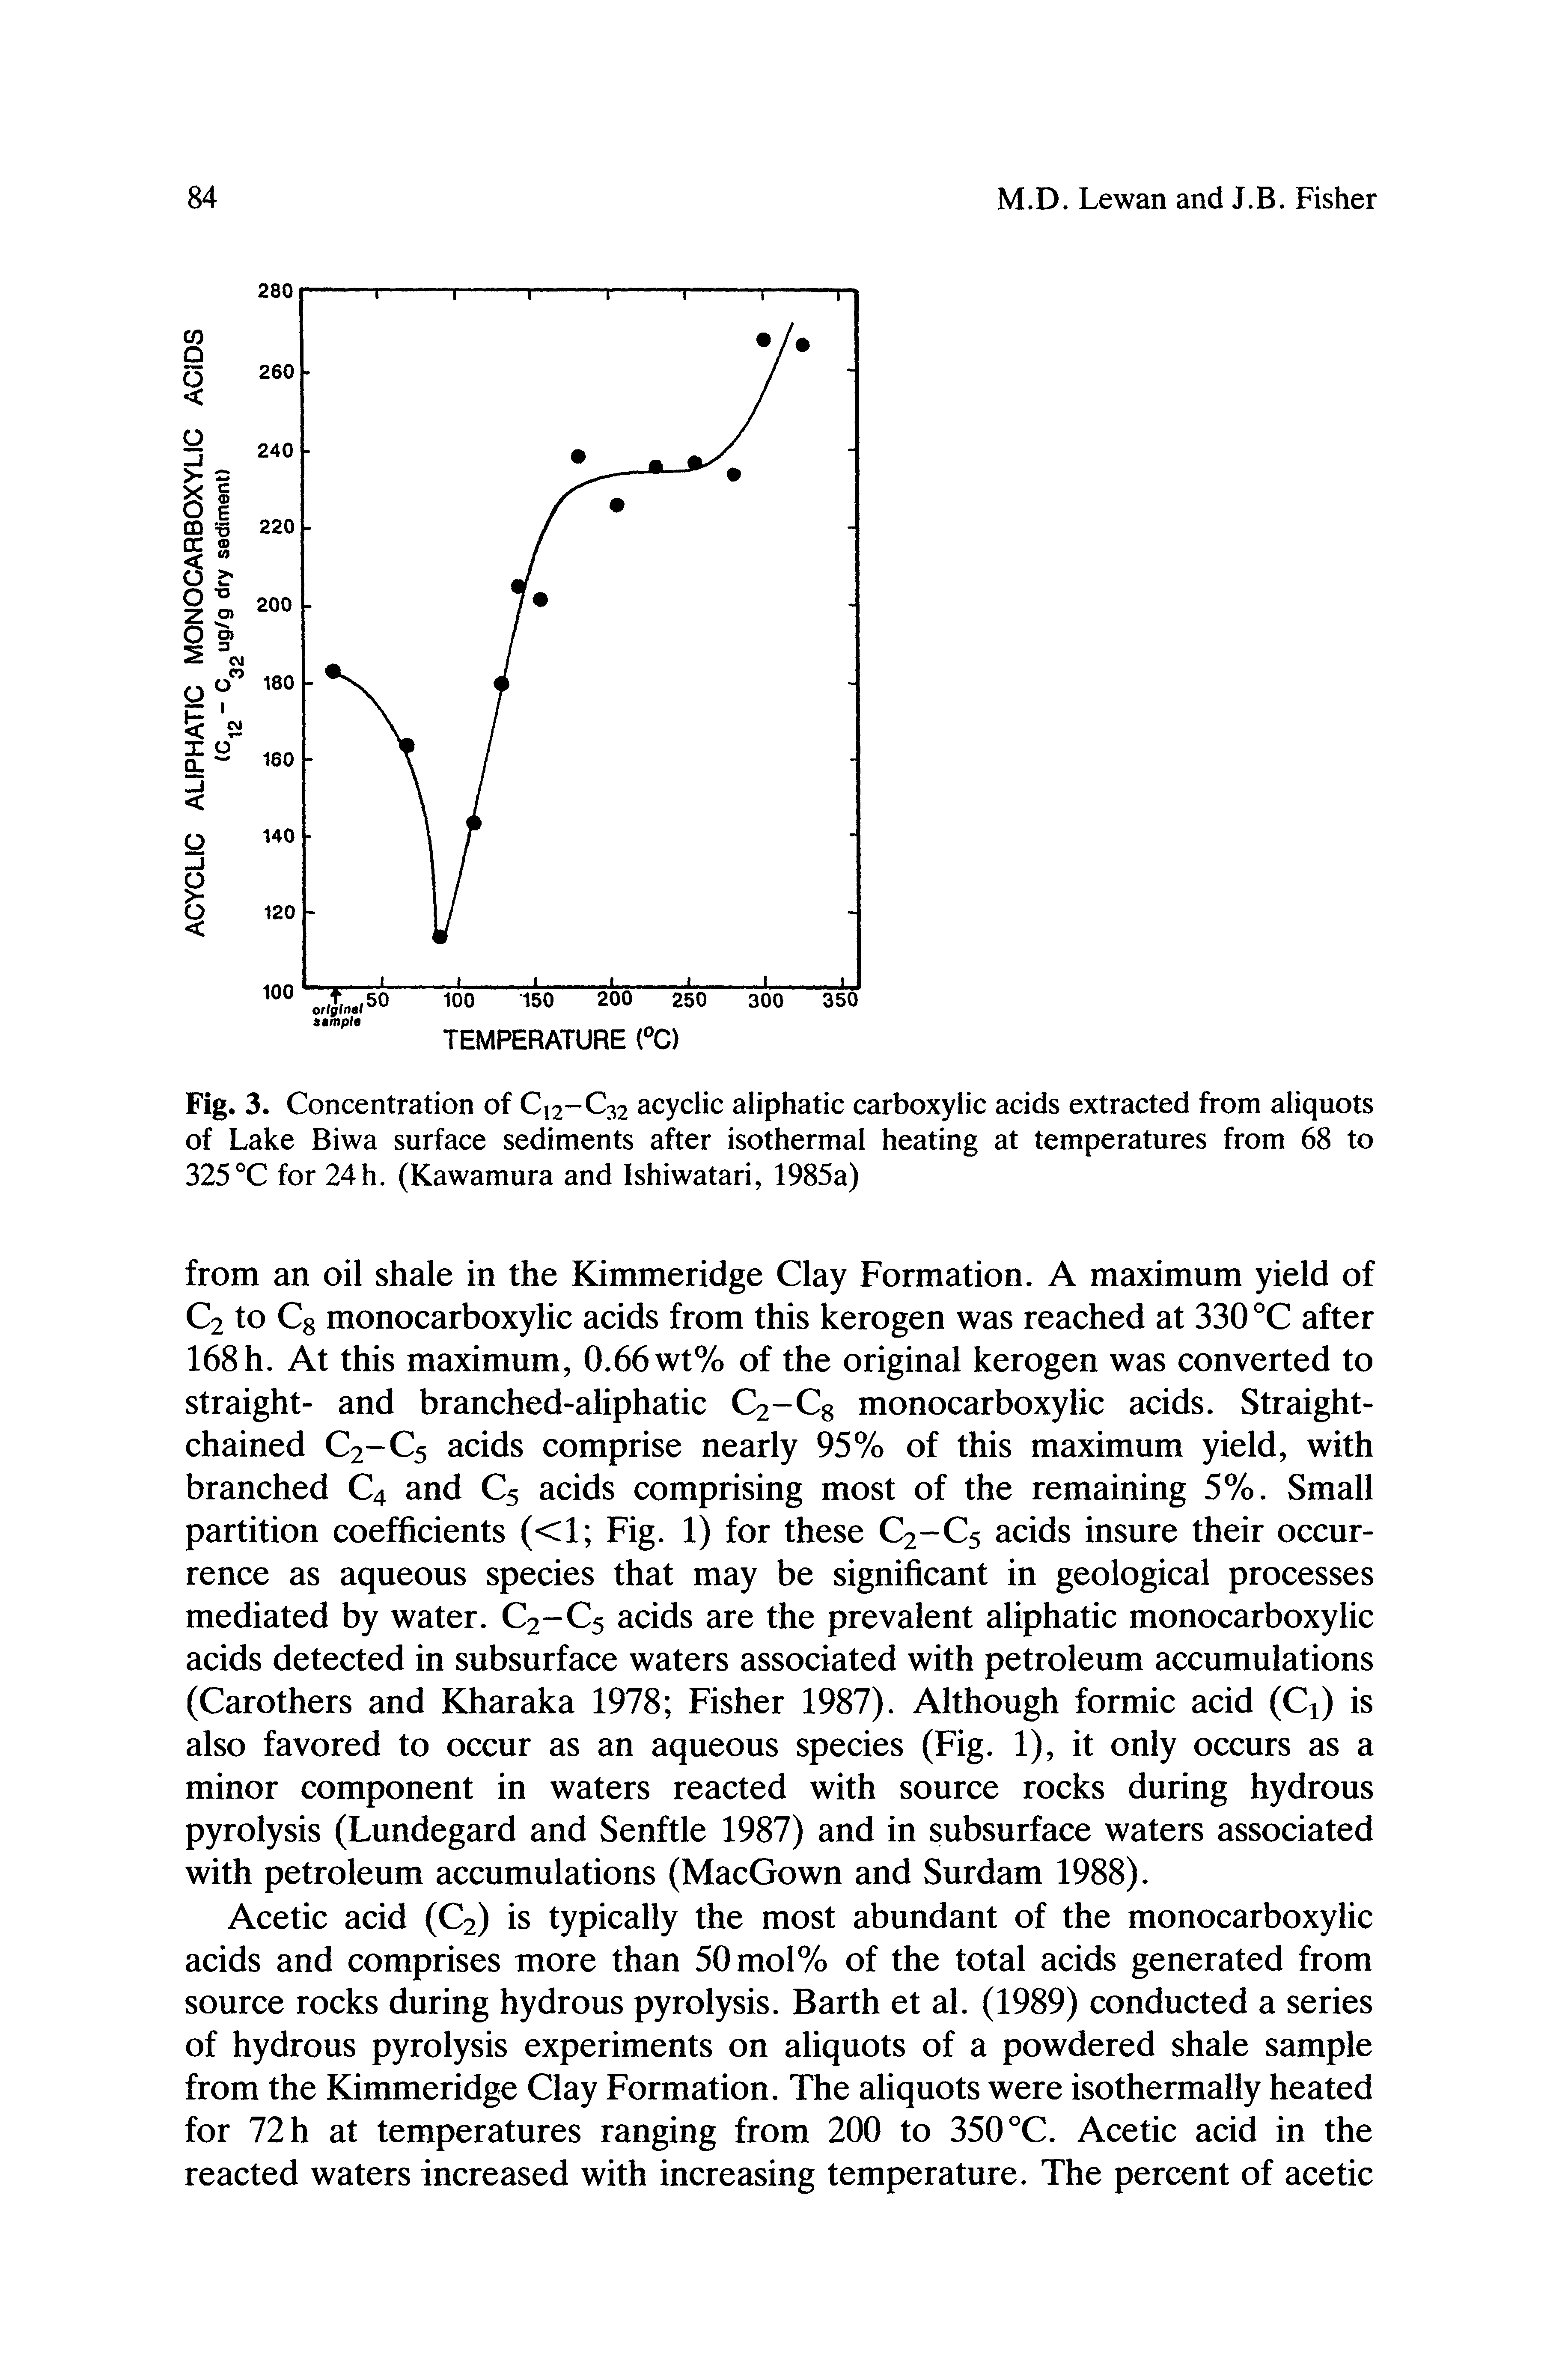 Fig. 3. Concentration of Ci2 C32 acyclic aliphatic carboxylic acids extracted from aliquots of Lake Biwa surface sediments after isothermal heating at temperatures from 68 to 325°C for 24h. (Kawamura and Ishiwatari, 1985a)...